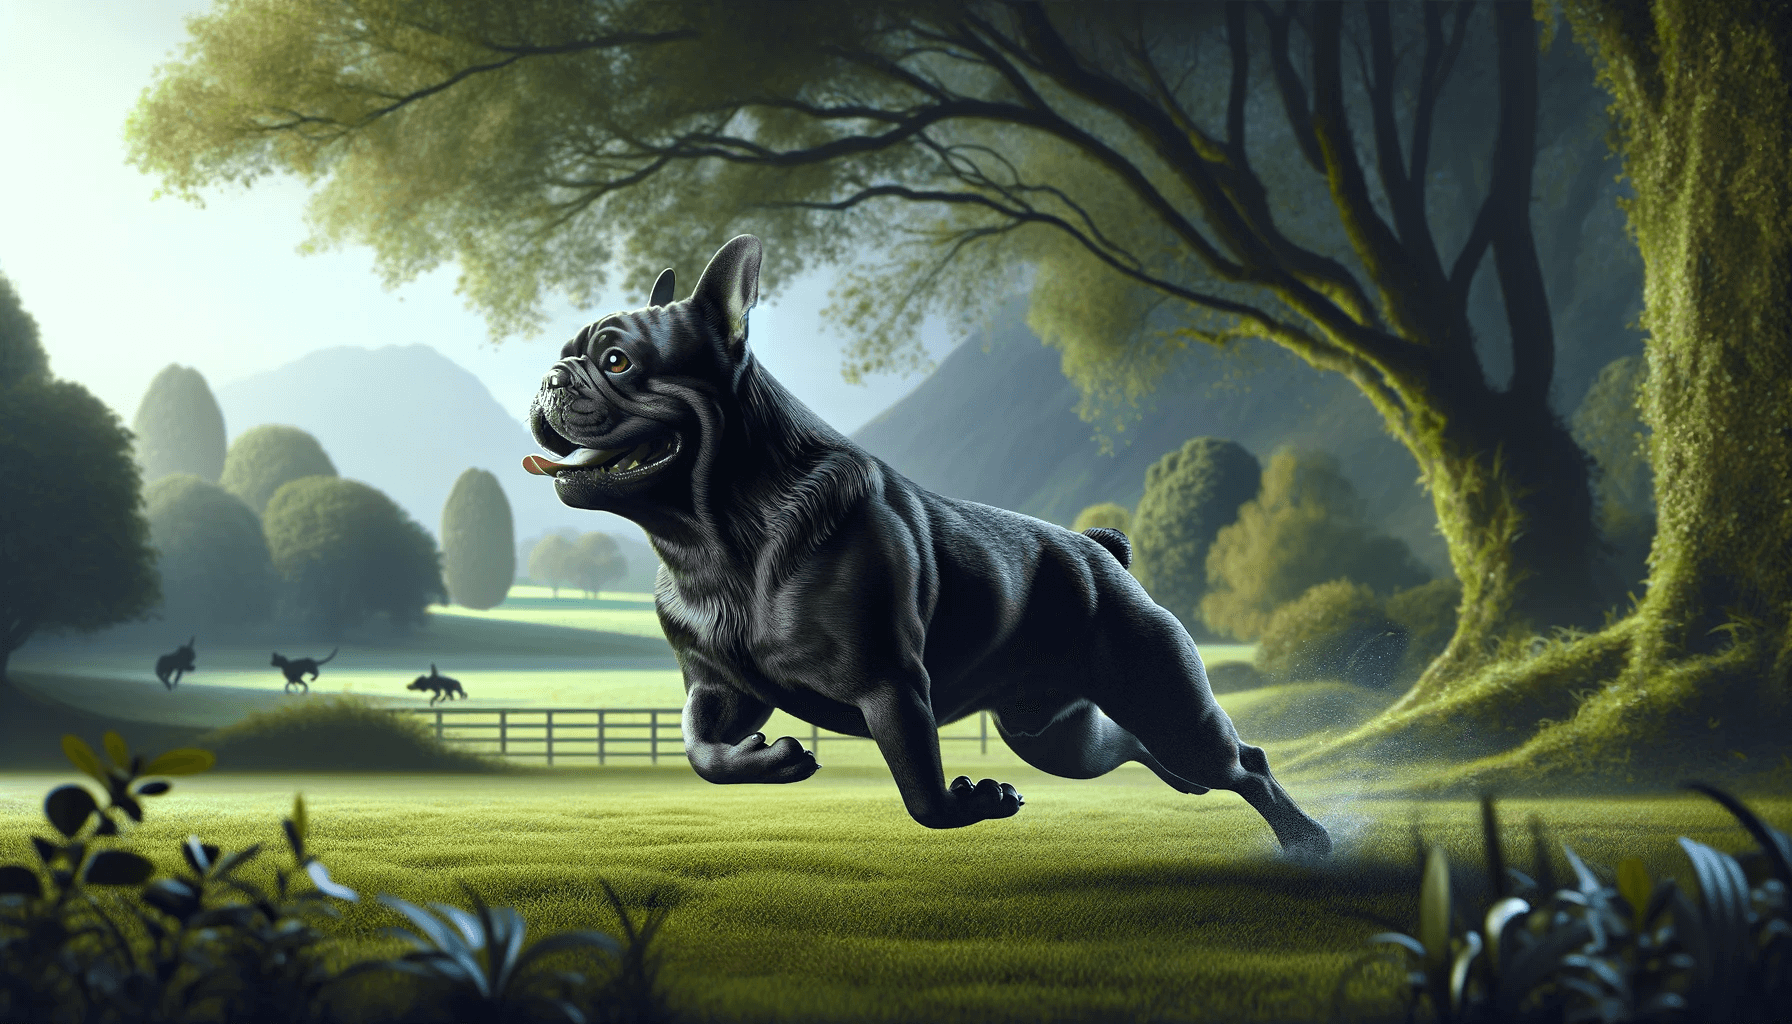 Black French Bulldog Engaged in Training or Play